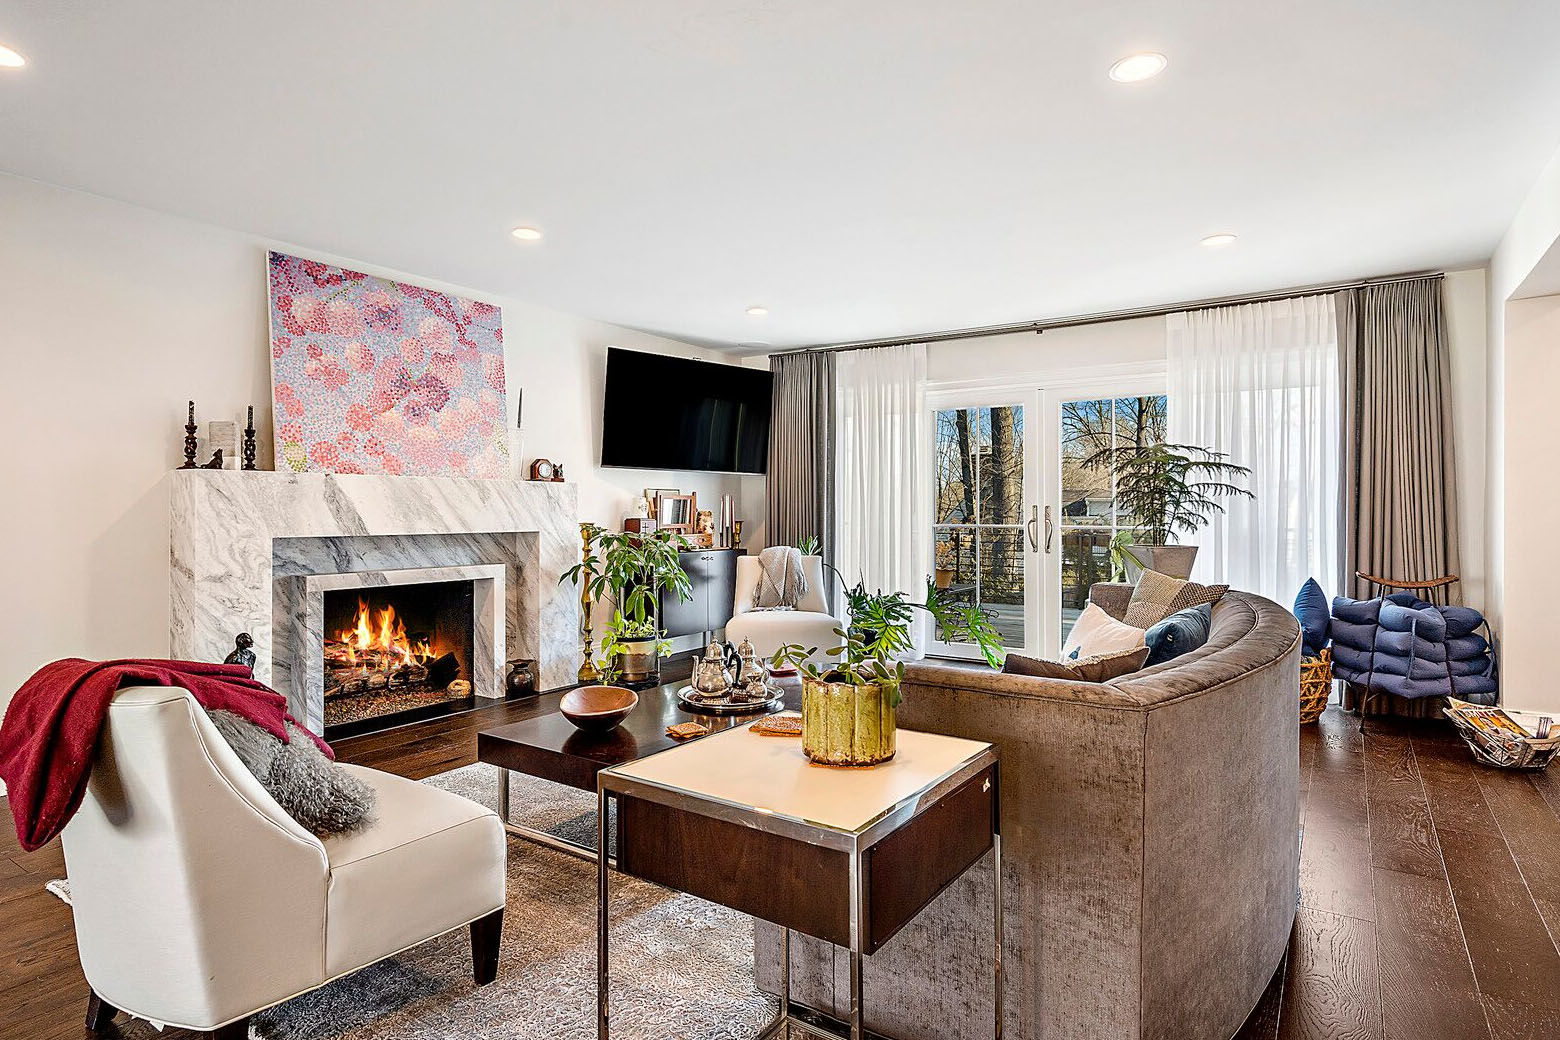 The 5,512-square-foot house features walnut hardwood floors throughout the house. Other luxury features include a custom-designed gas fireplace with Carrera marble. (Courtesy Century 21 New Millennium/RealMarkets)